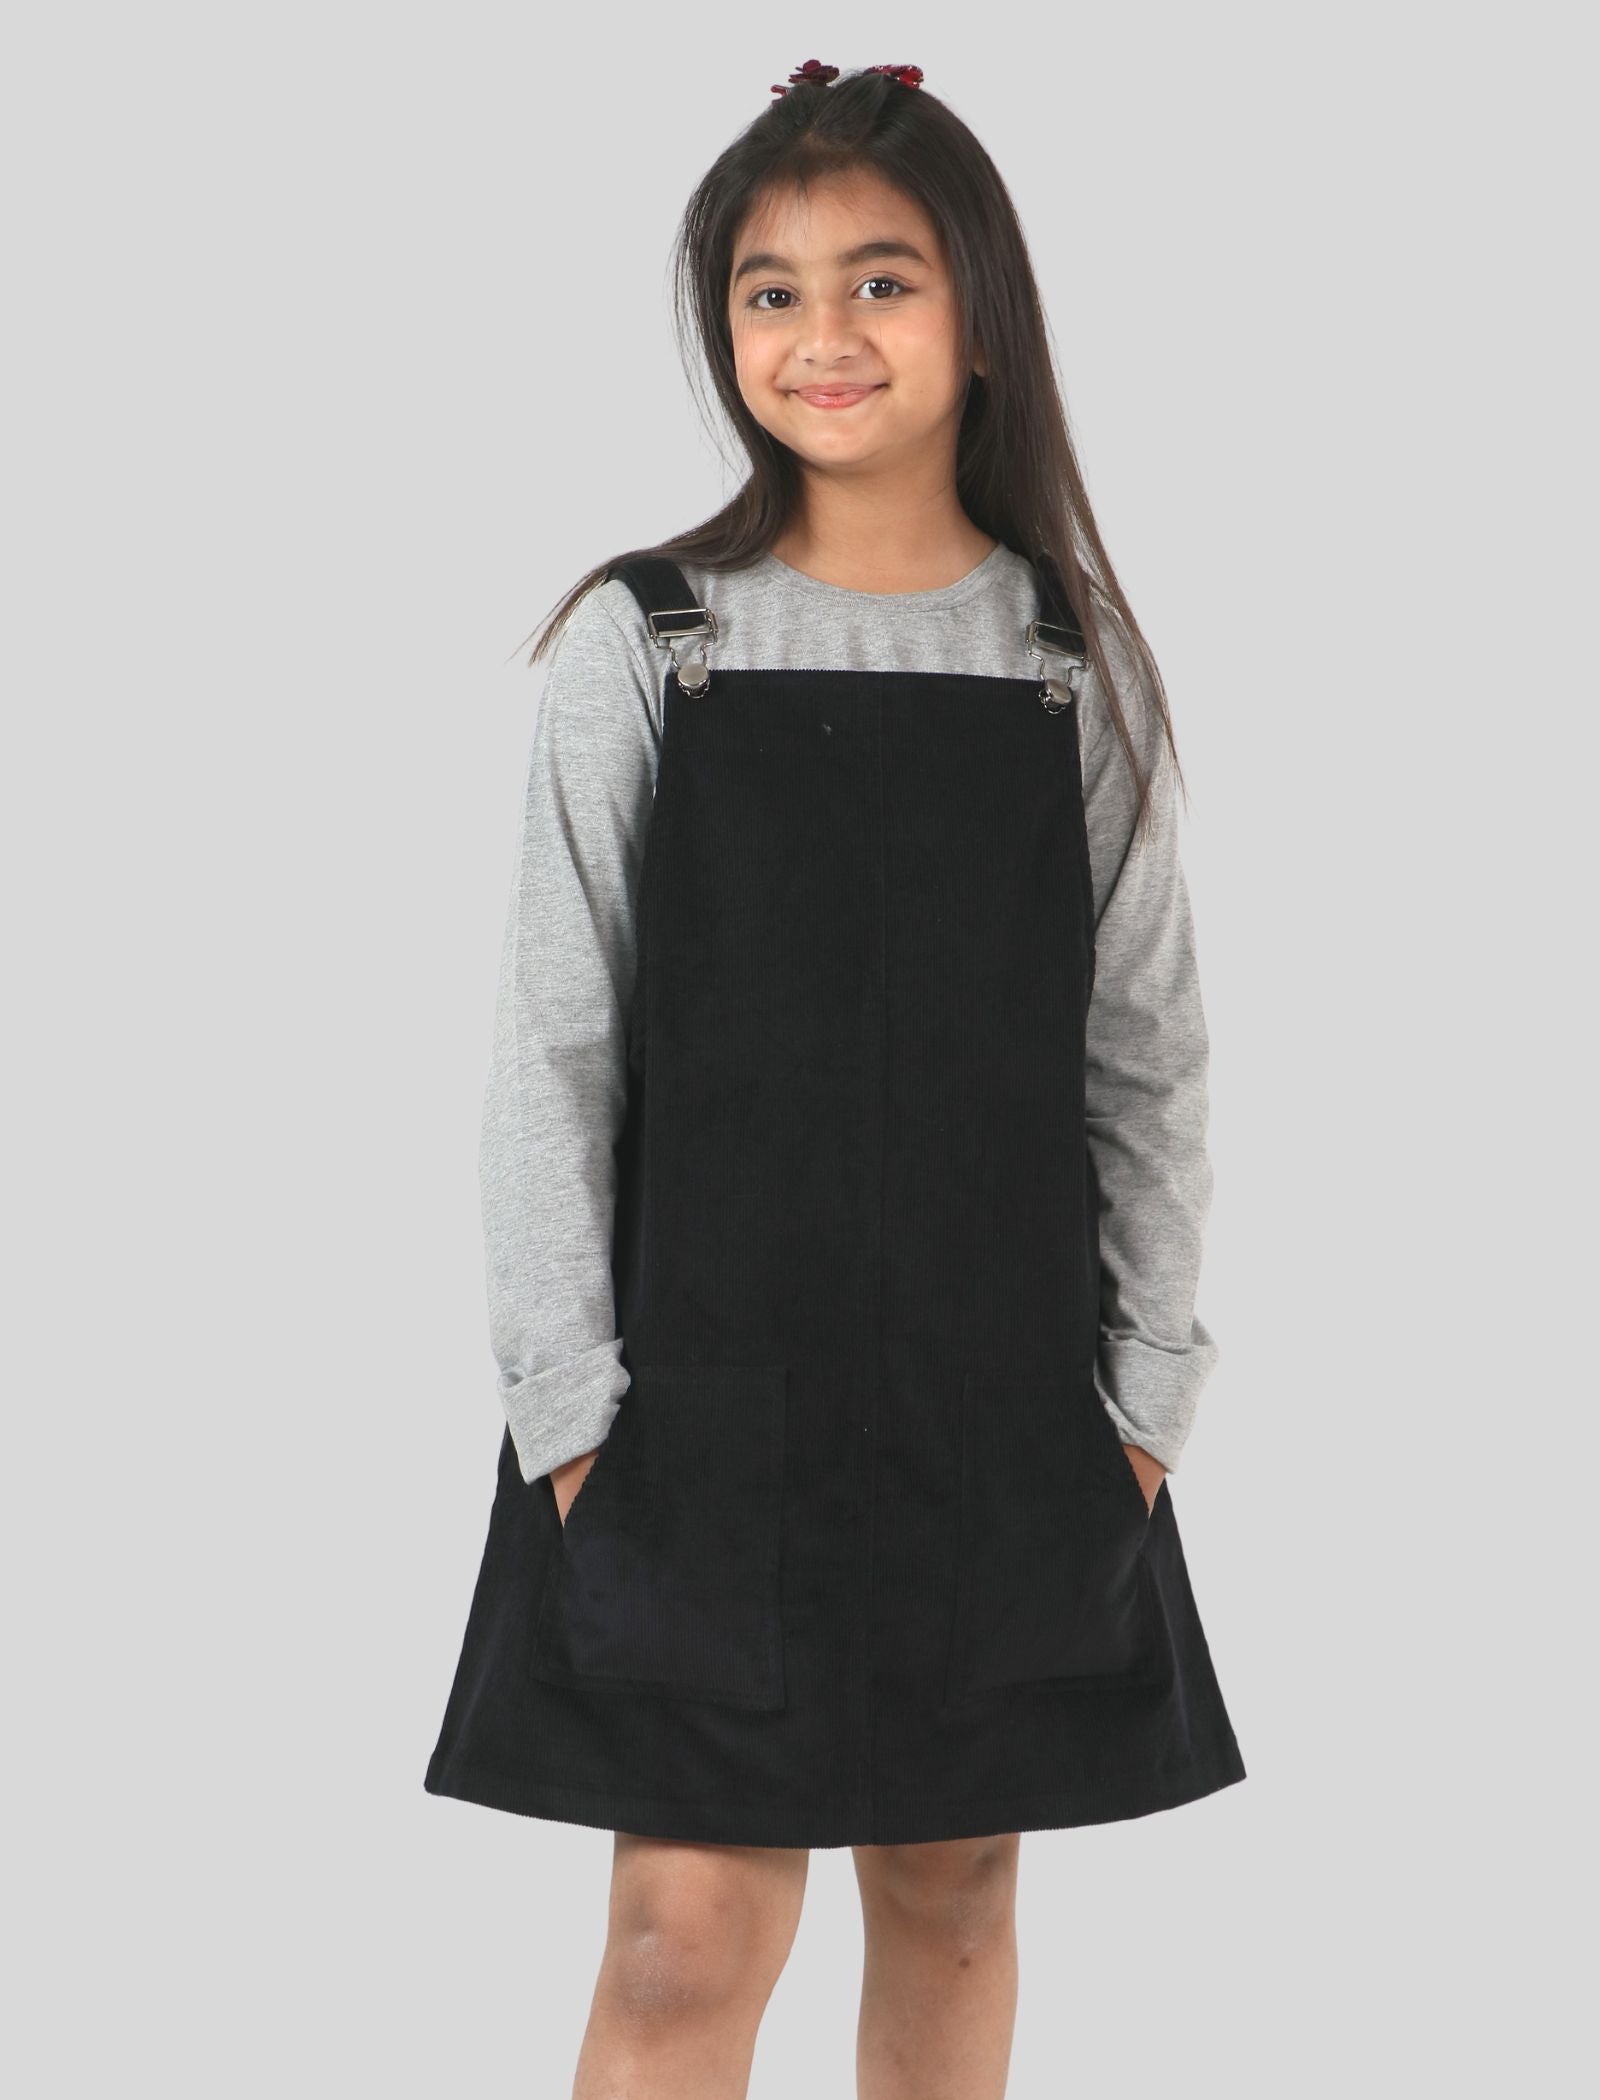 Girls Kids All in One Pinafore Dress Elasticated Waist Age 4-5years Height  20ins | eBay